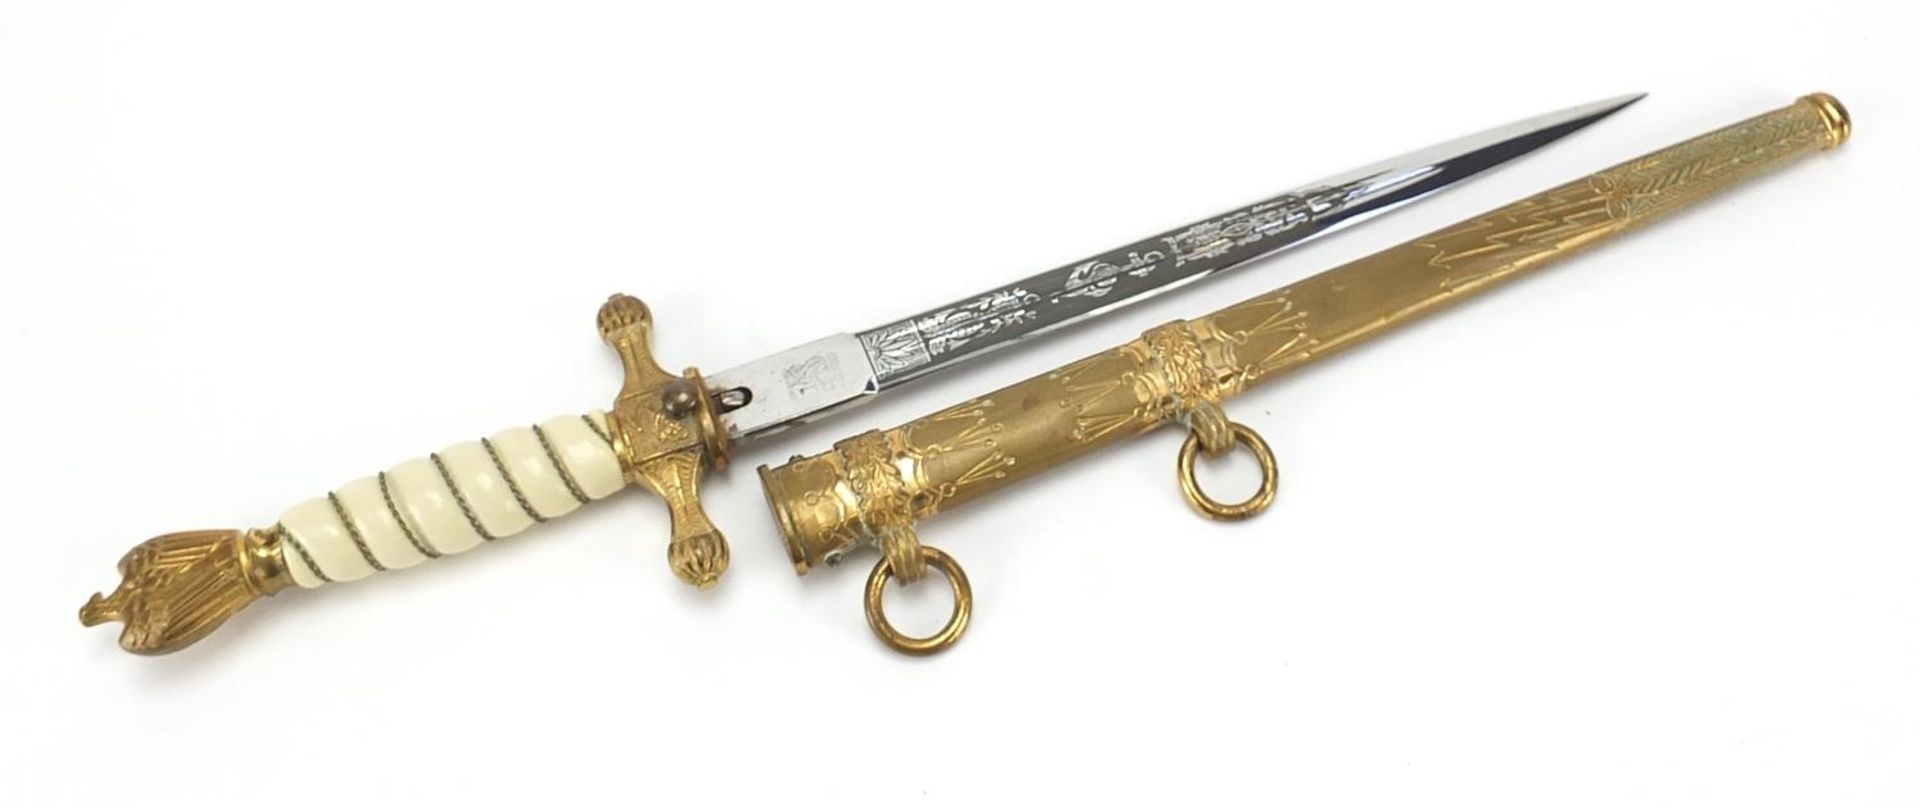 German military World War II Naval dirk with scabbard and engraved steel blade by Carl Eichkhorn - Image 2 of 3